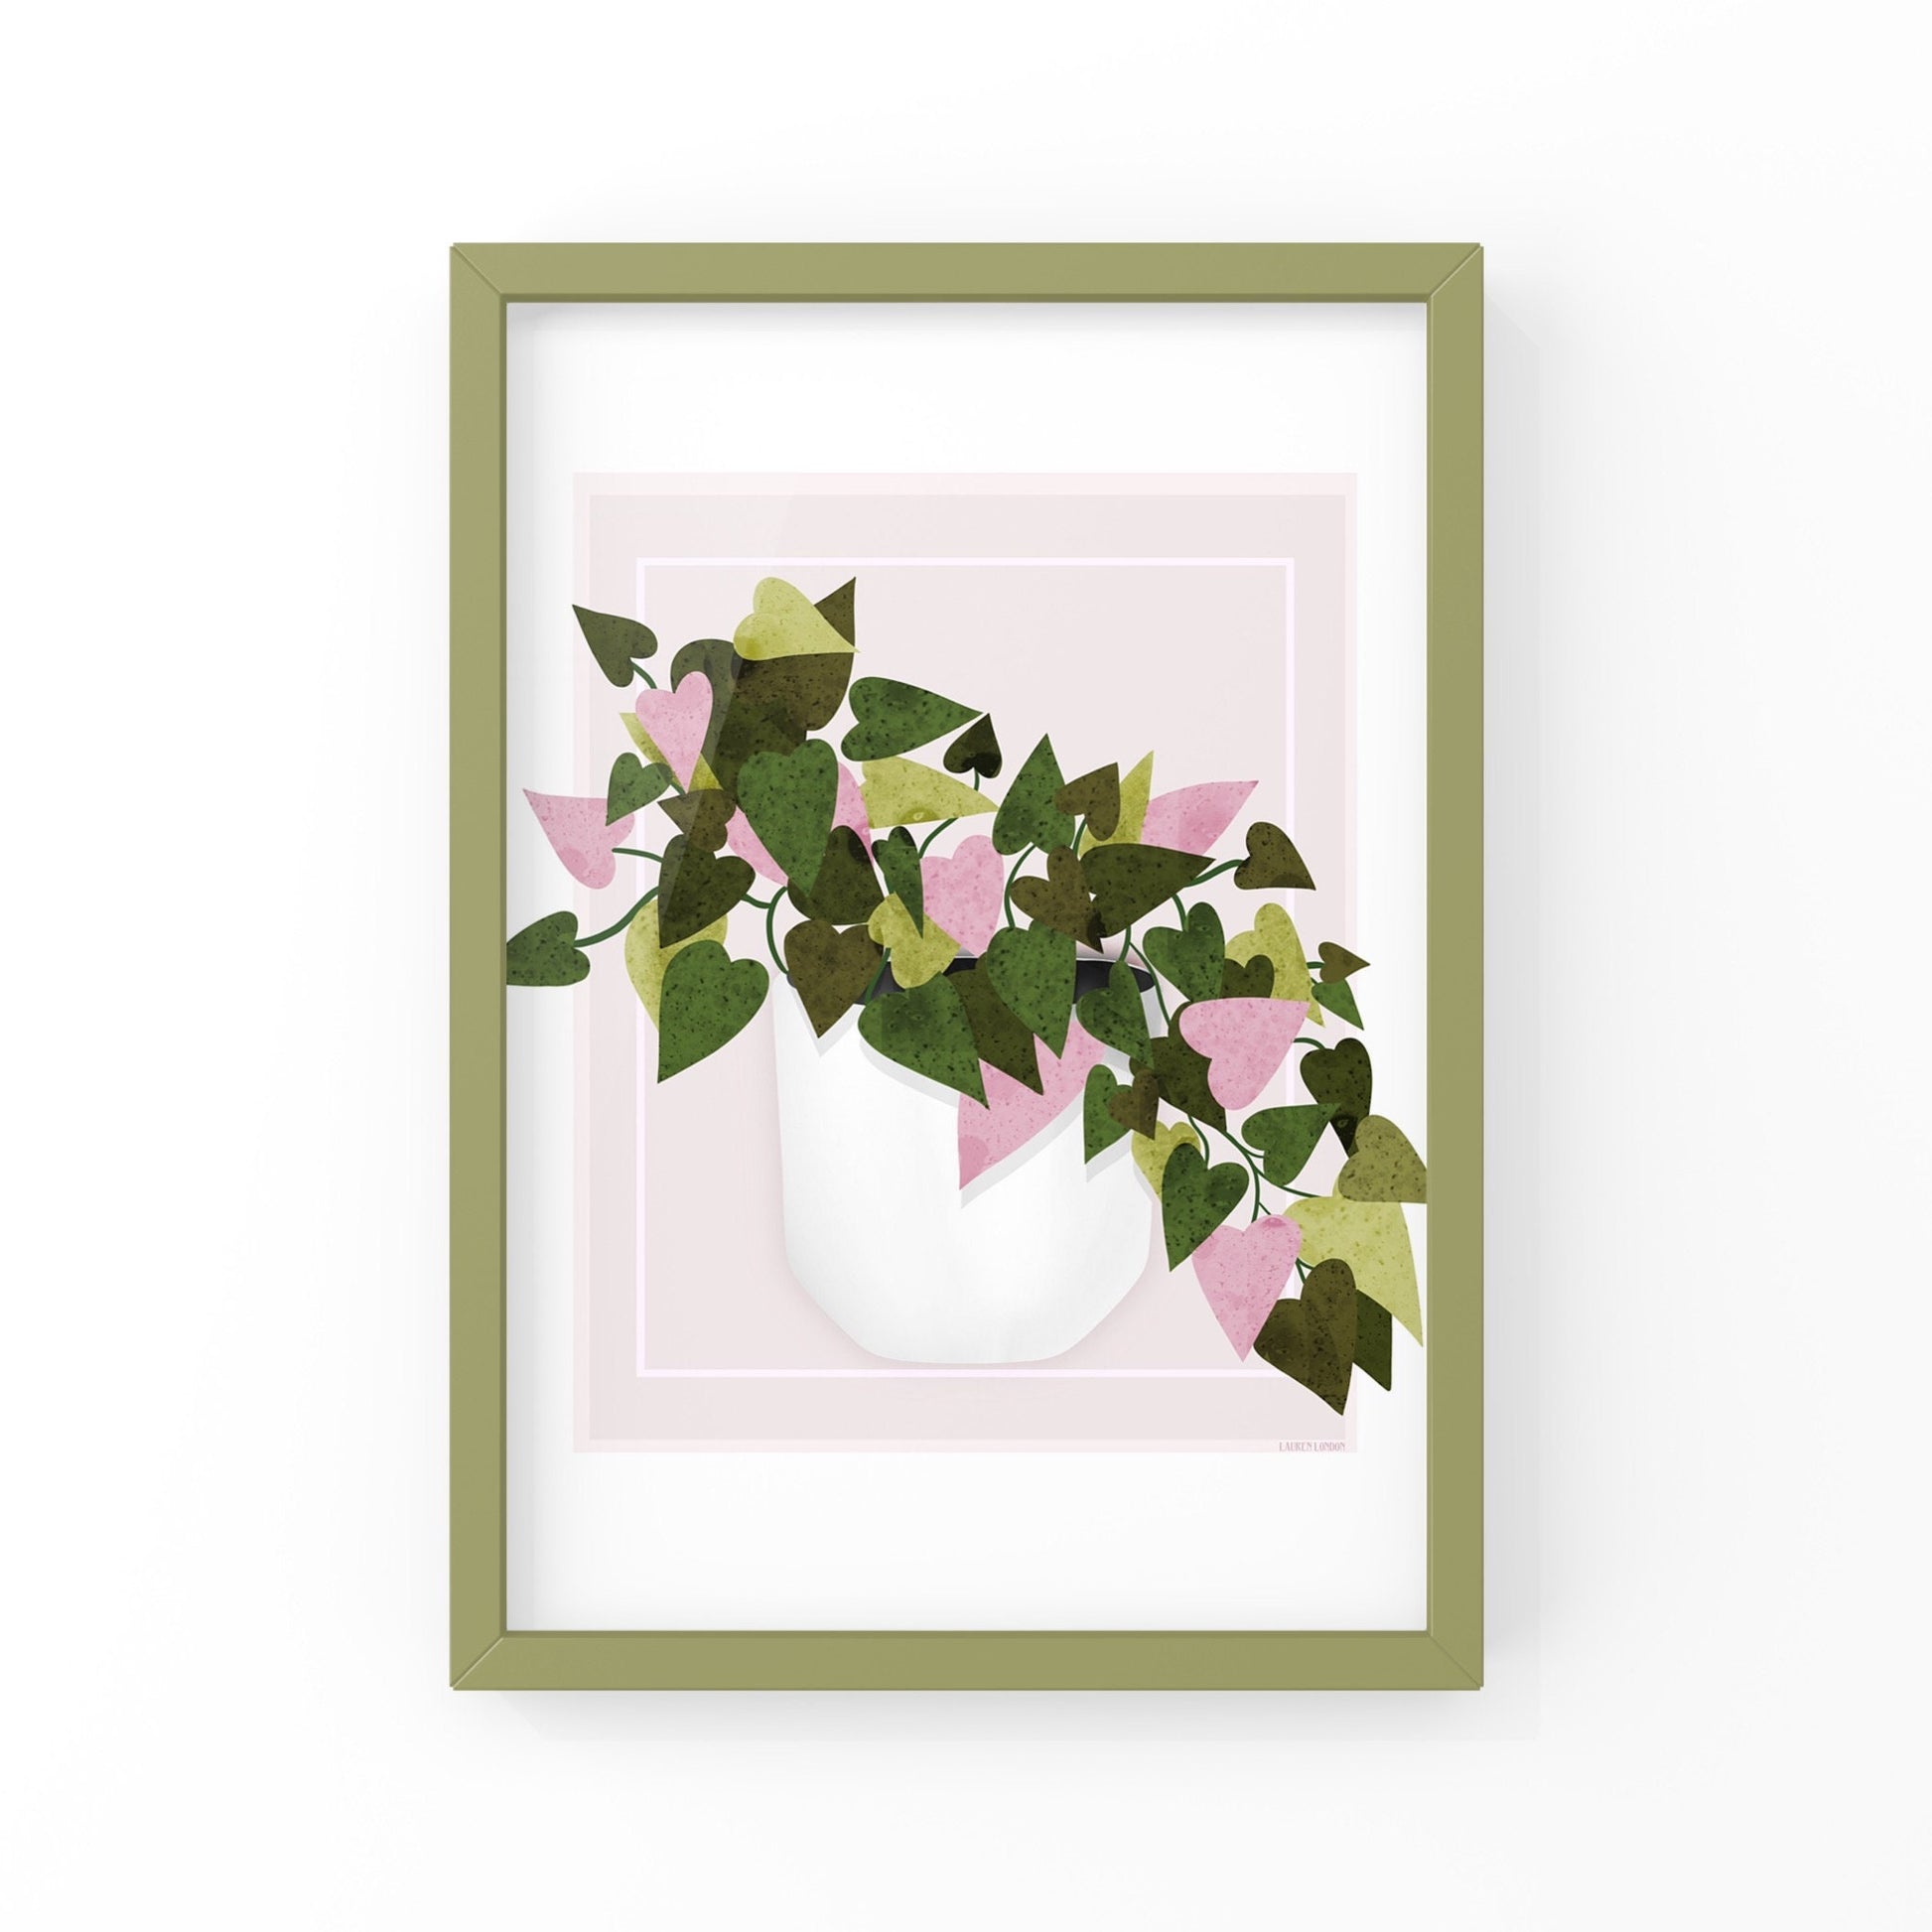 This lively, bright, leafy art print will bring any old space to life! Would work great in as office decor or living room decor, bathroom wall art, etc! It would also look great as part of a gallery wall - the possibilities are limitless. The drawing is of a beautiful Paper Gold Black Philodendron plant in a white planter - drawn with pink and green leaves.  